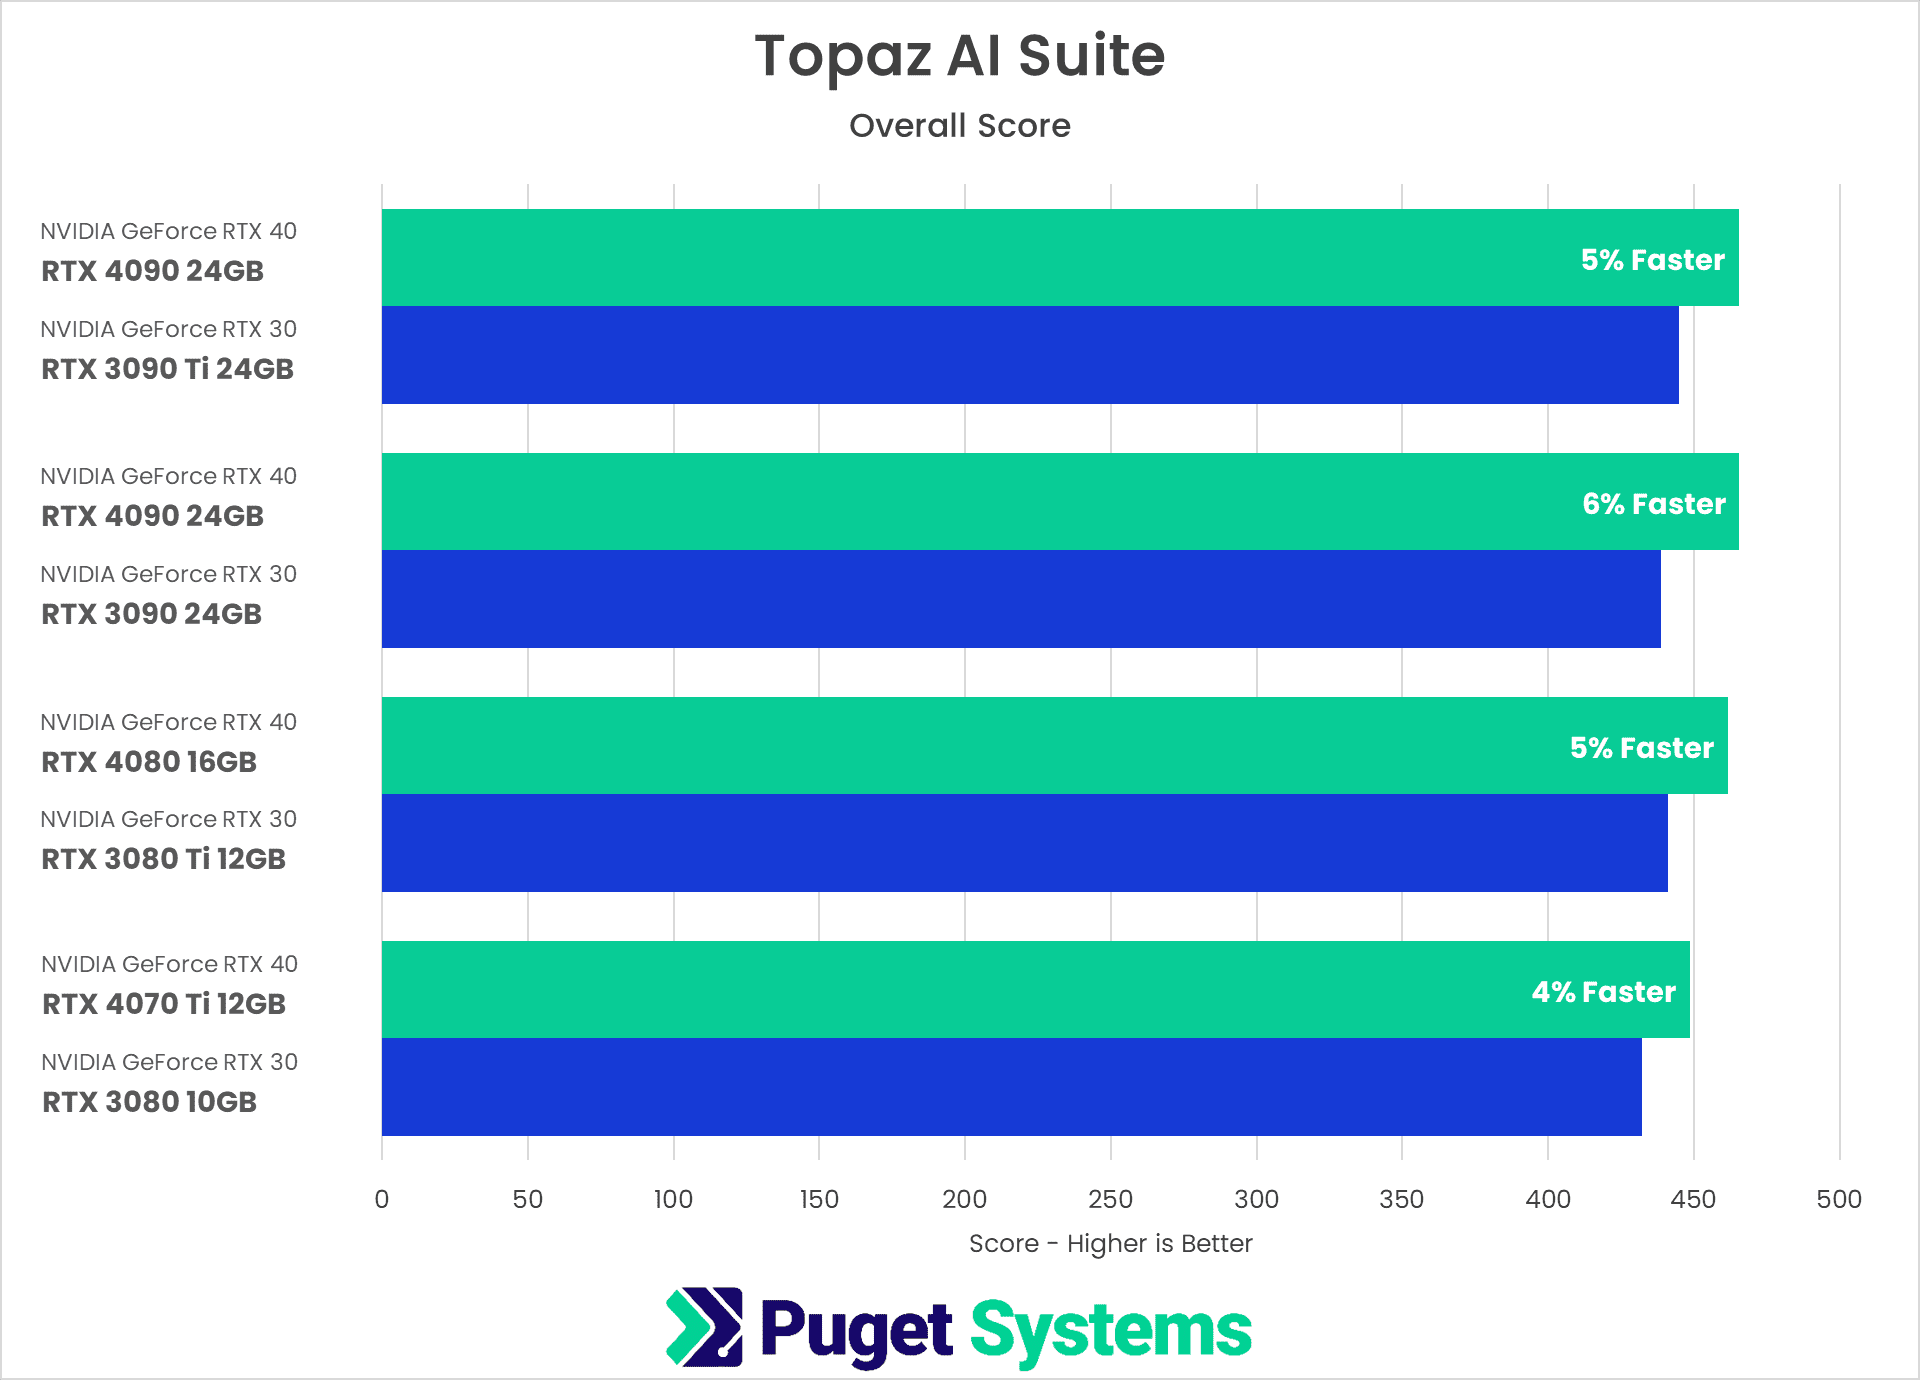 Topaz AI Suite Benchmark Overall Score Results NVIDIA GeForce RTX 40-Series vs 30-Series